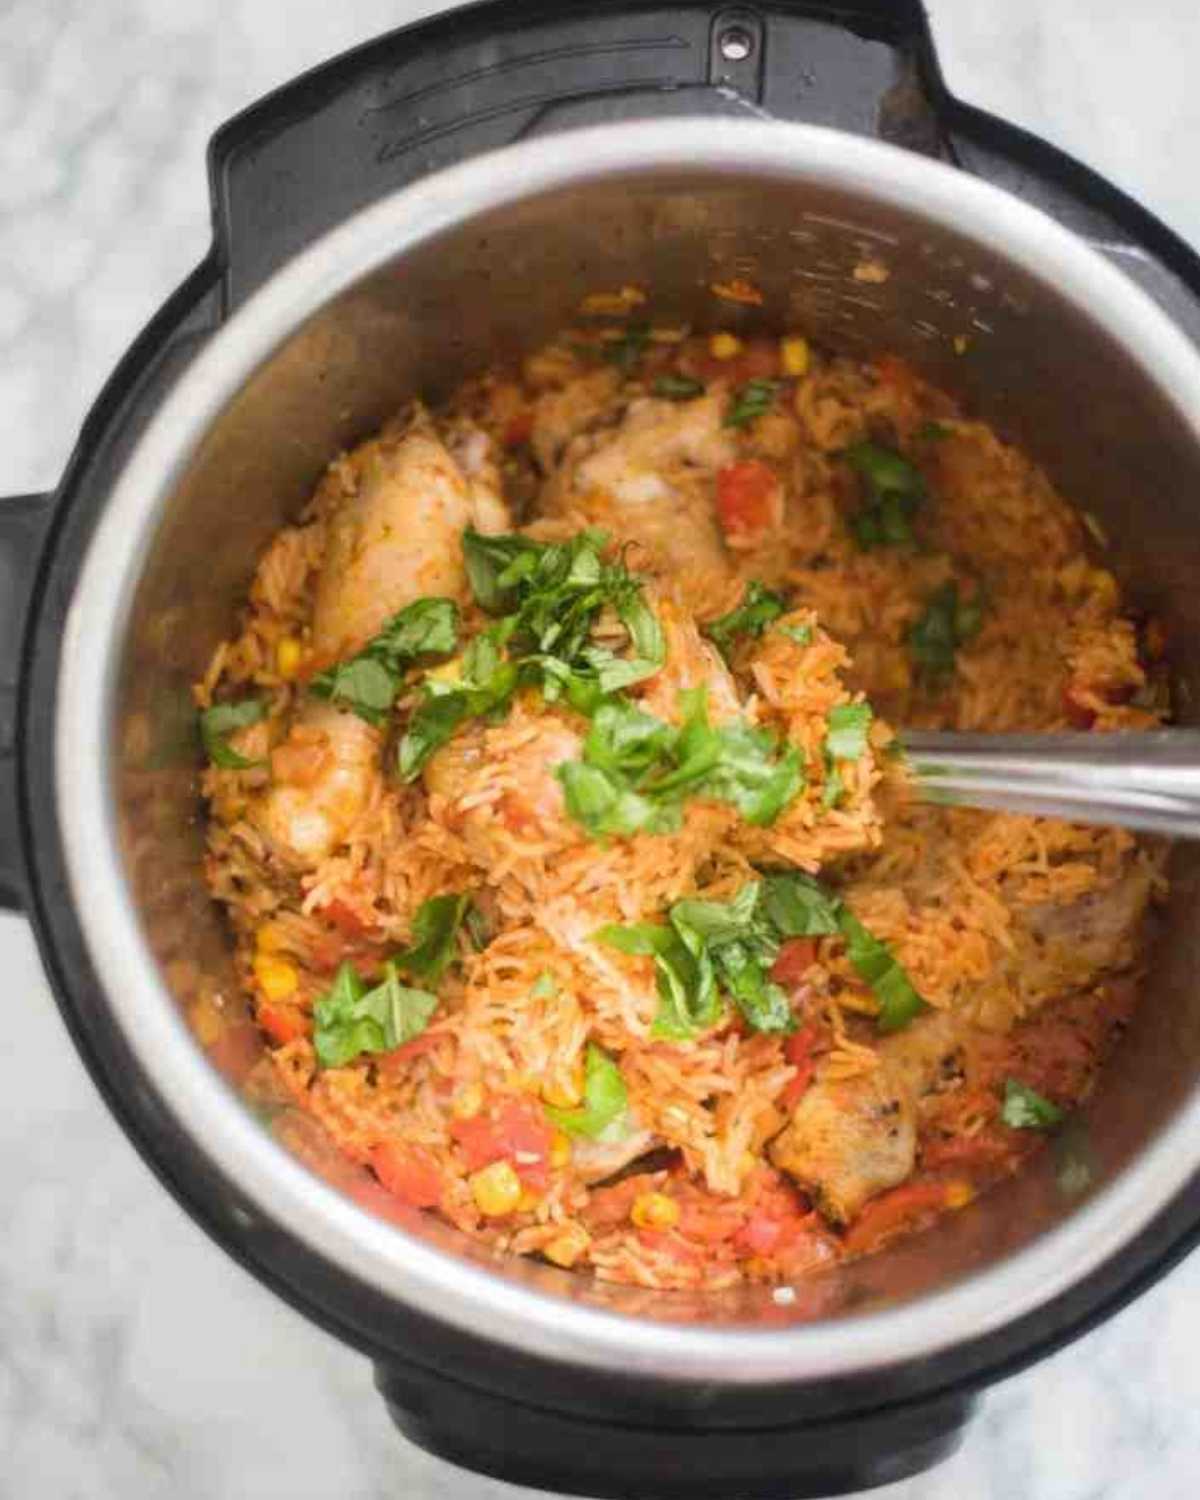 Cooked chicken and rice in an Instant Pot 